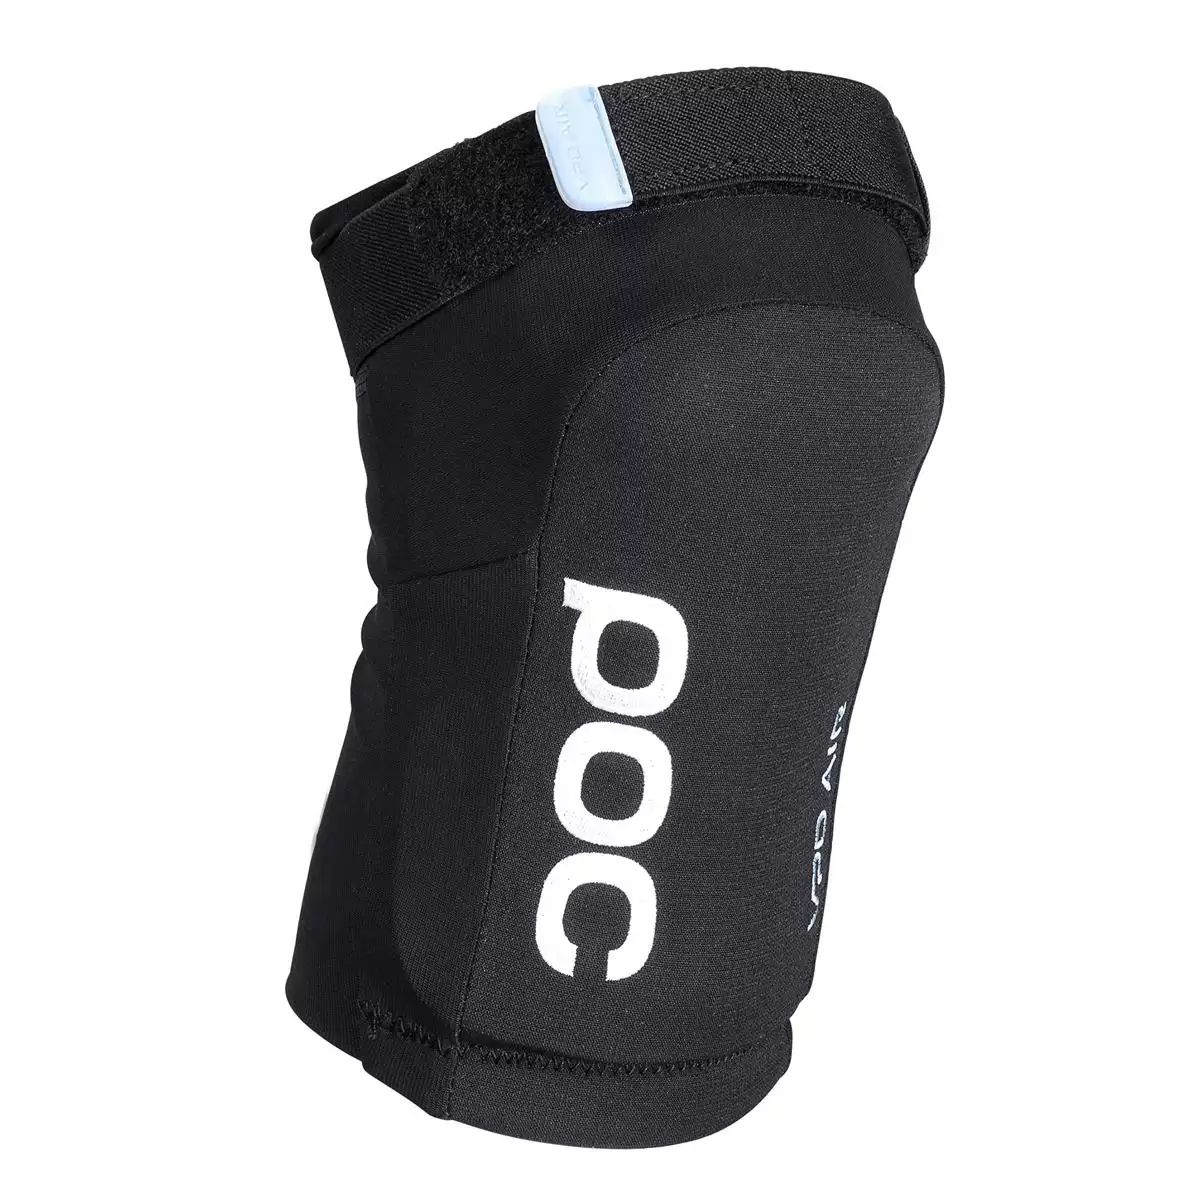 Joint VPD Air Knee pads black Size XS - image